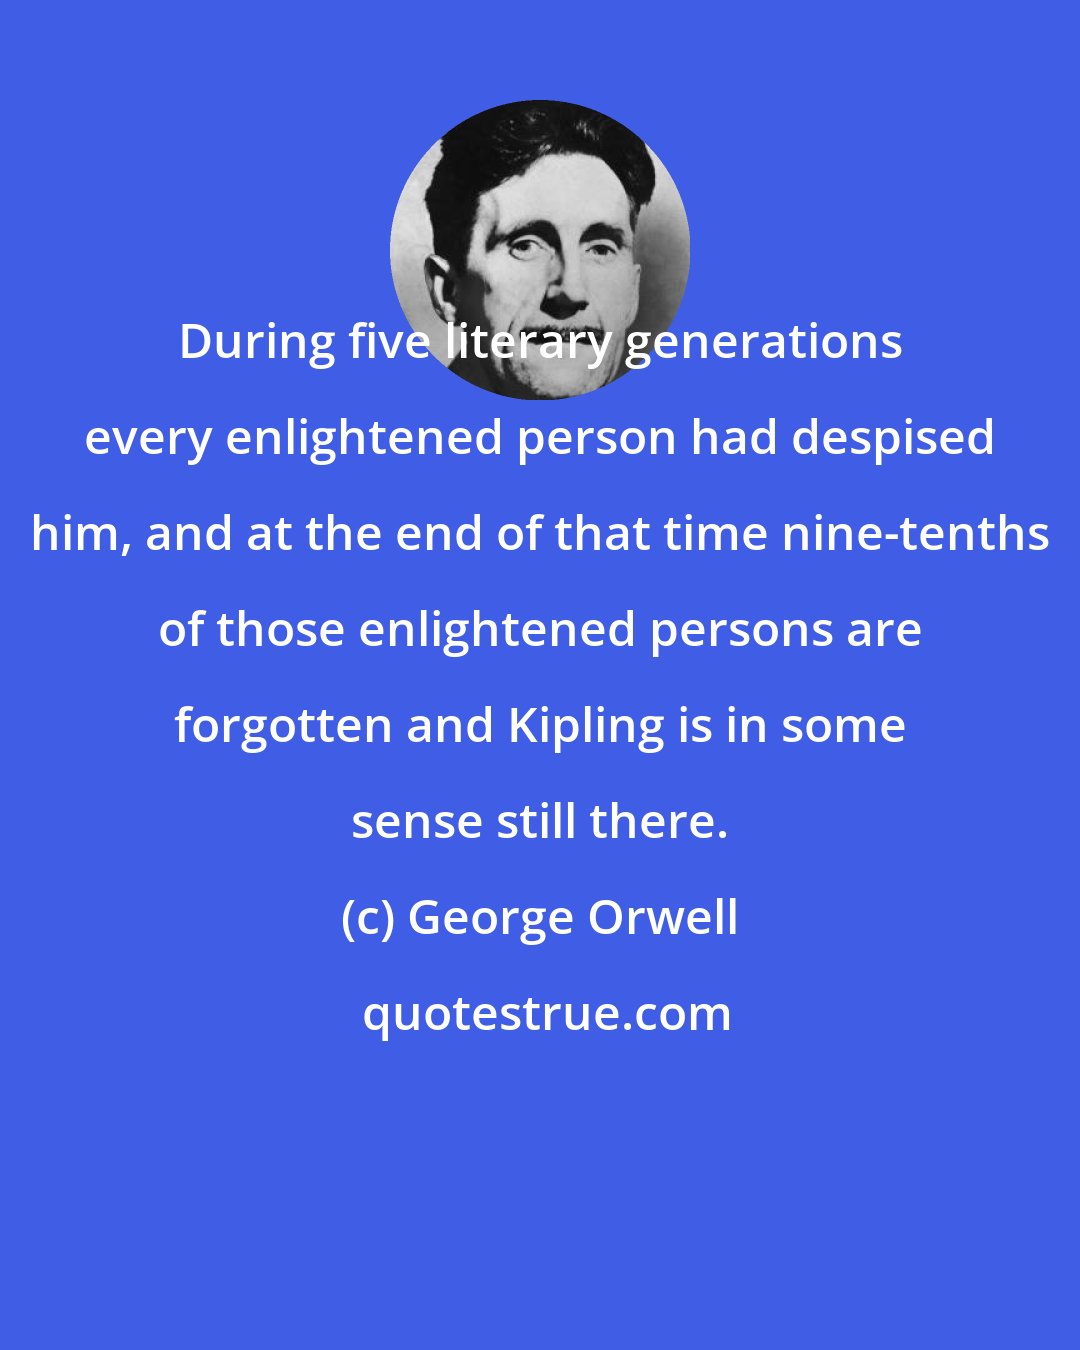 George Orwell: During five literary generations every enlightened person had despised him, and at the end of that time nine-tenths of those enlightened persons are forgotten and Kipling is in some sense still there.